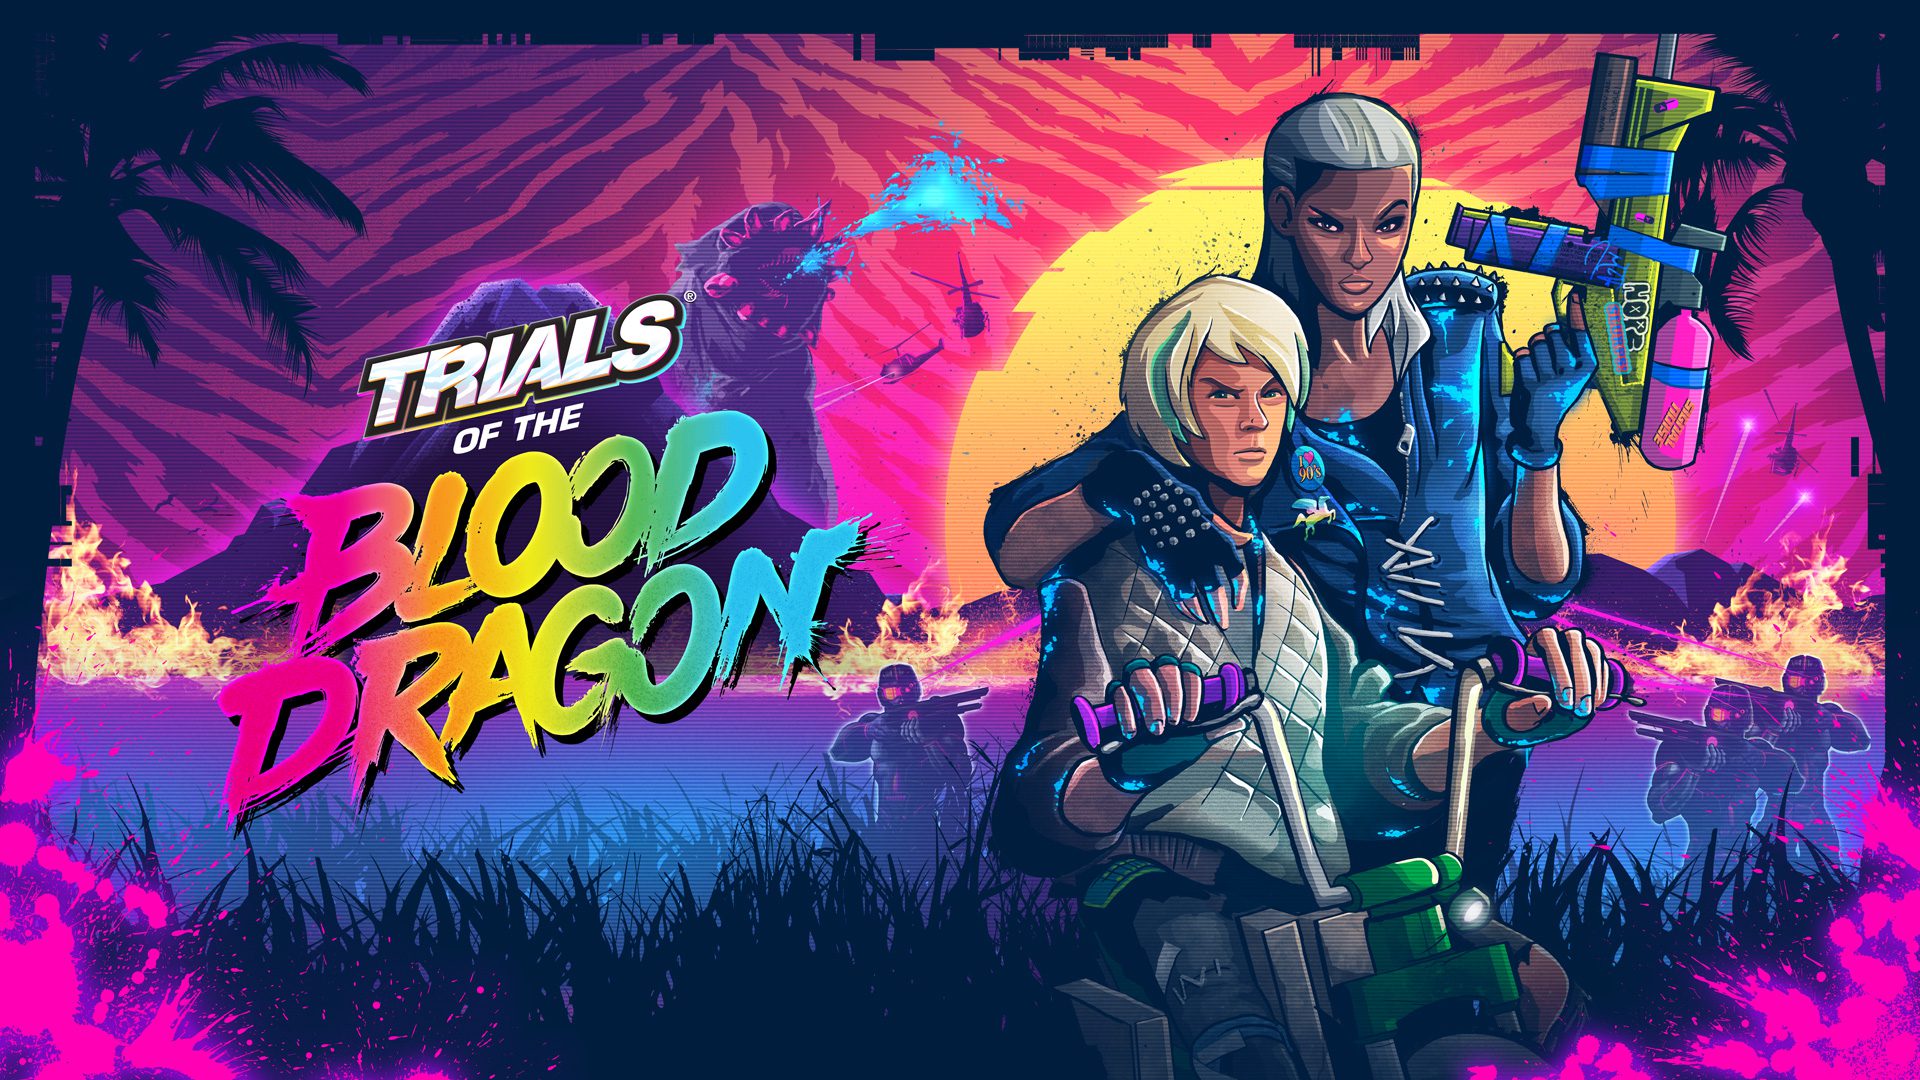 Trials of the Blood Dragon and Brave: The Video Game are now free through Games with Gold